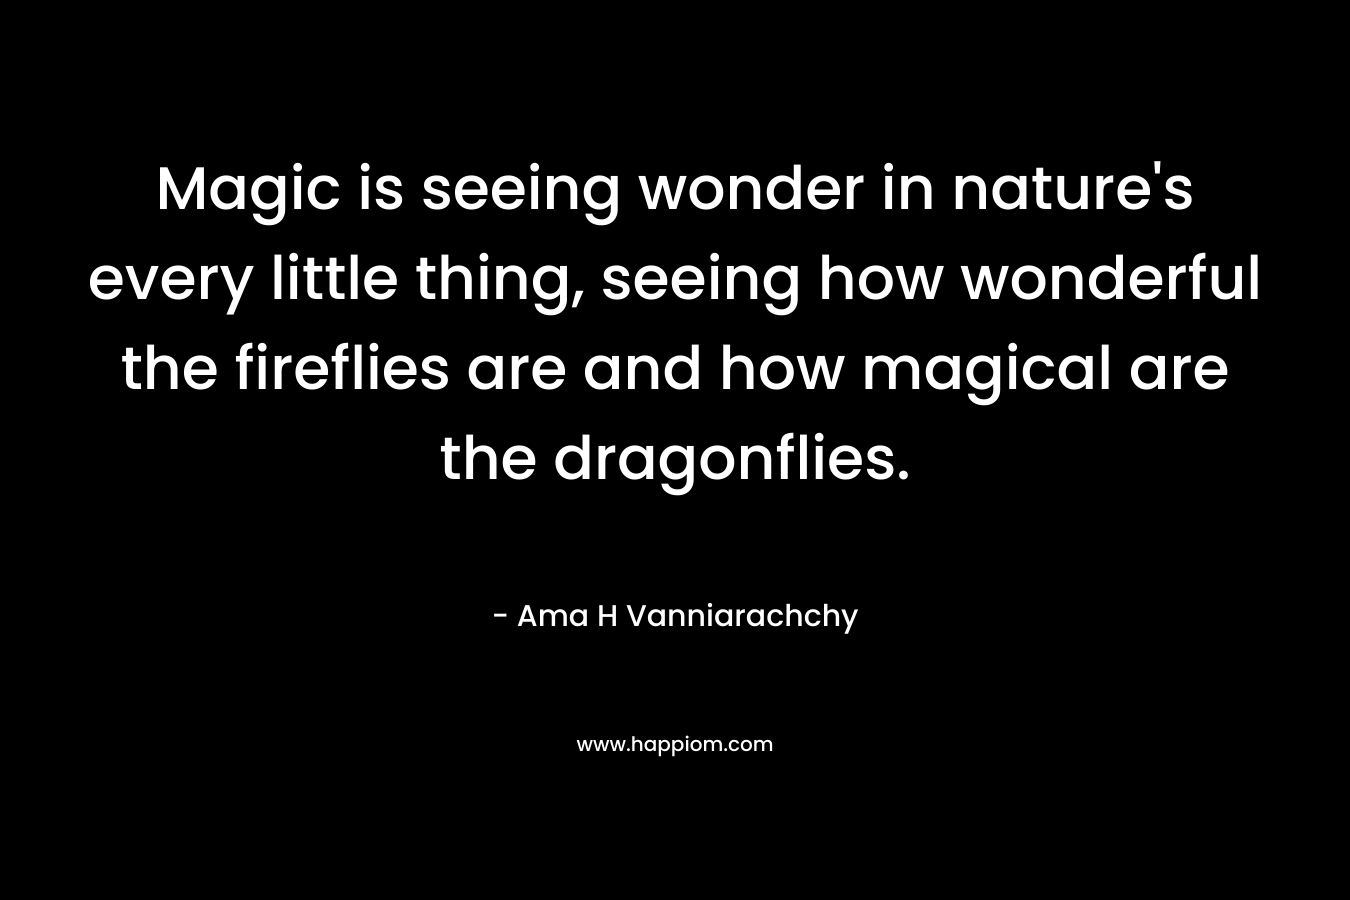 Magic is seeing wonder in nature's every little thing, seeing how wonderful the fireflies are and how magical are the dragonflies.